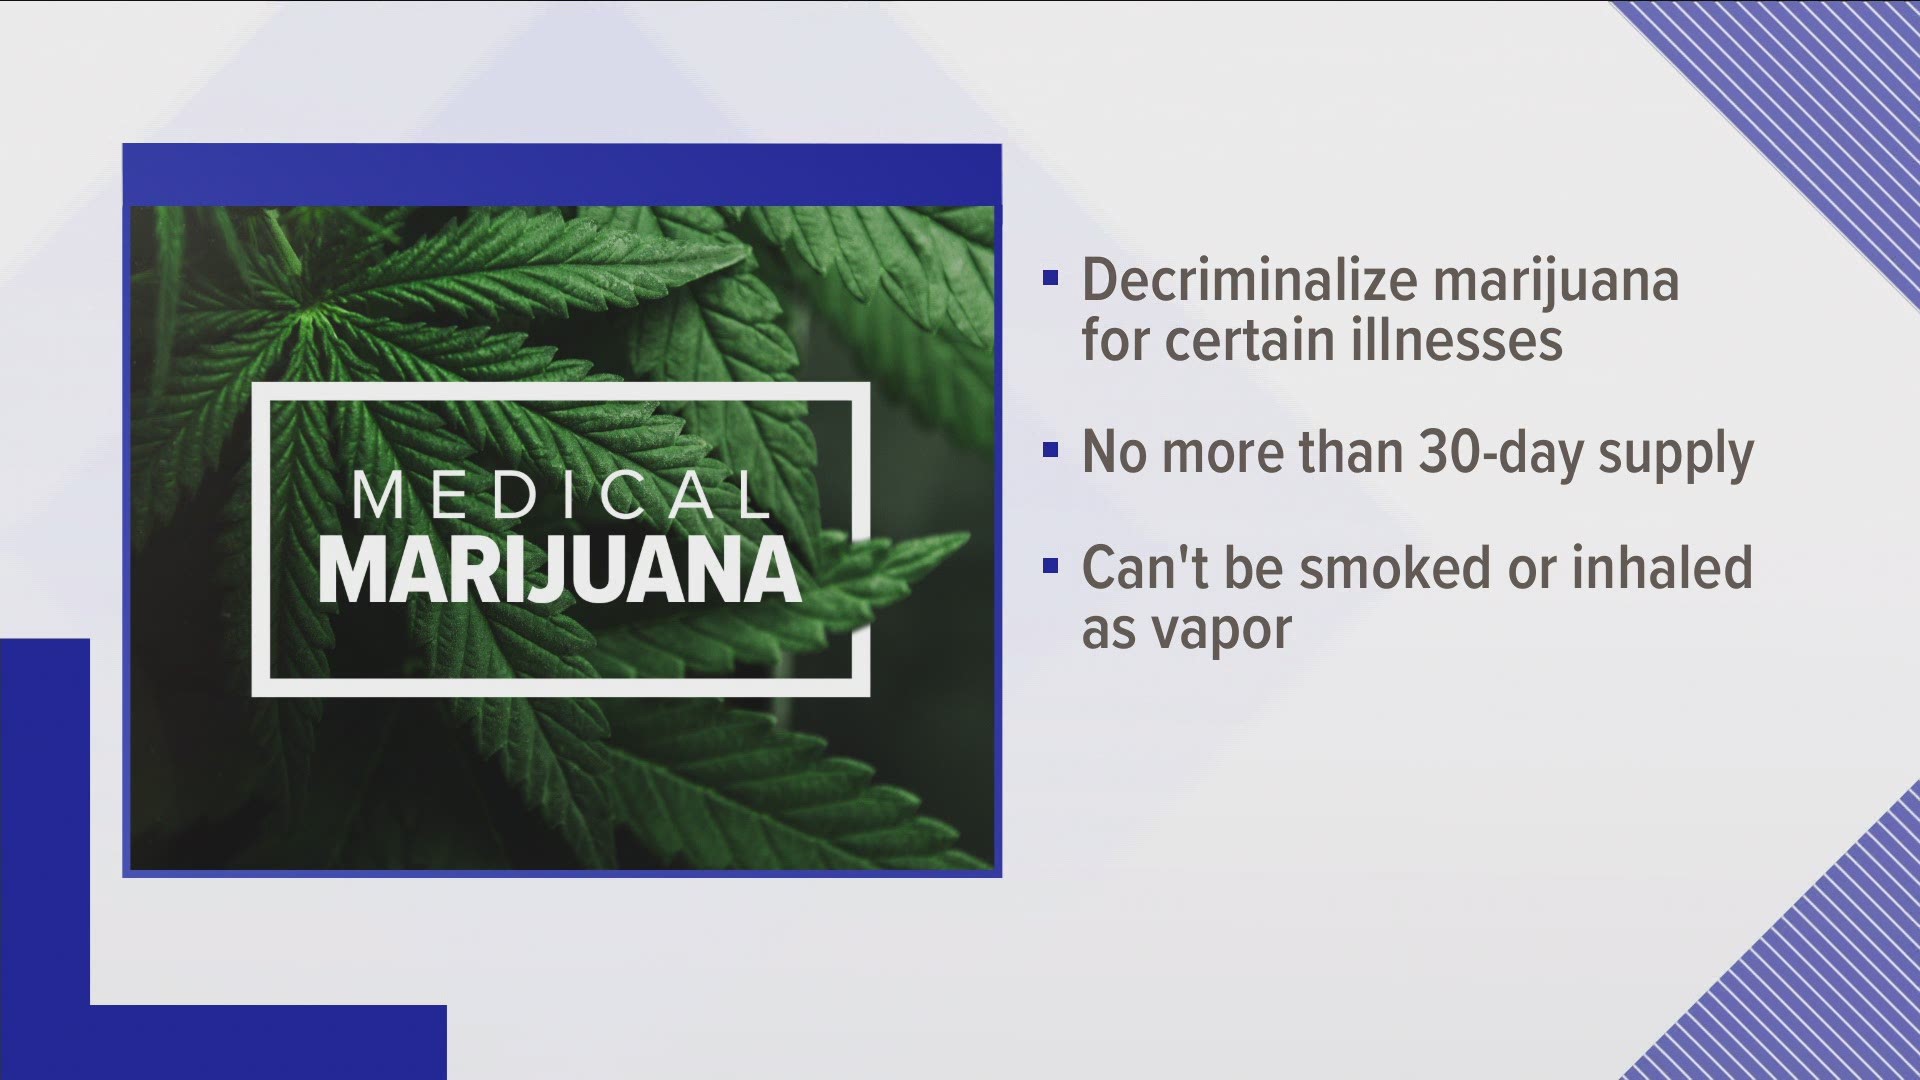 A bill that would decriminalize marijuana for people with some illness is making its way to the state Senate.